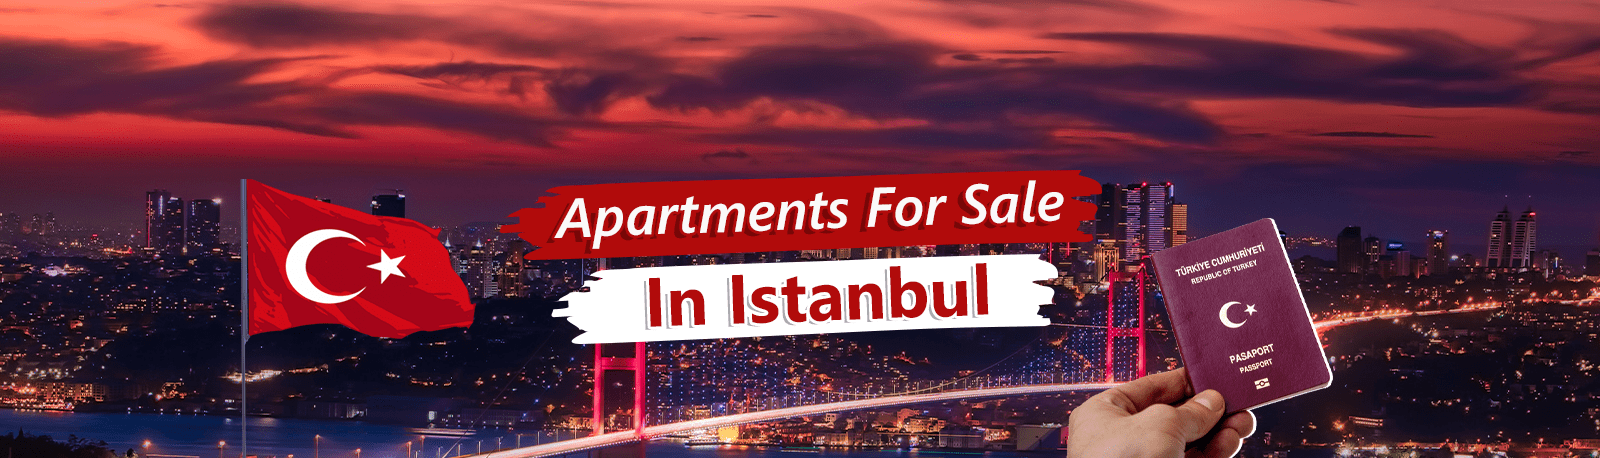 Apartment For Sale in Istanbul